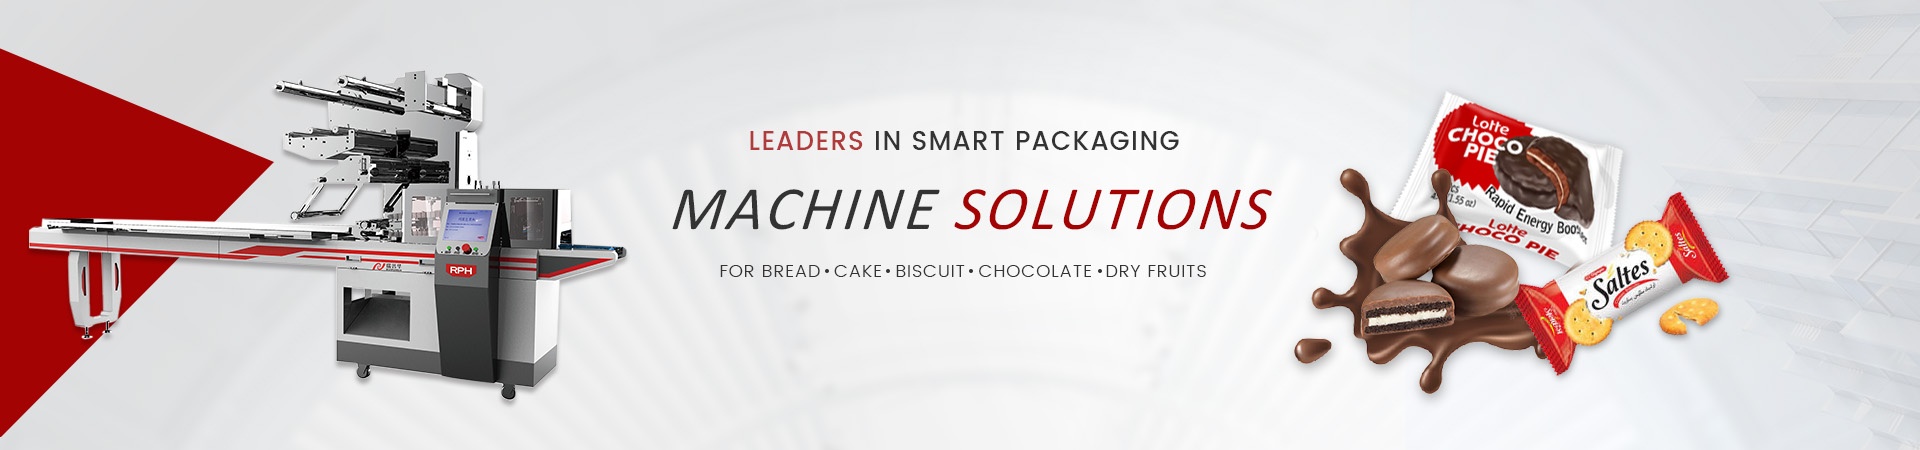 Packaging Machinery: Revolutionizing the Industry